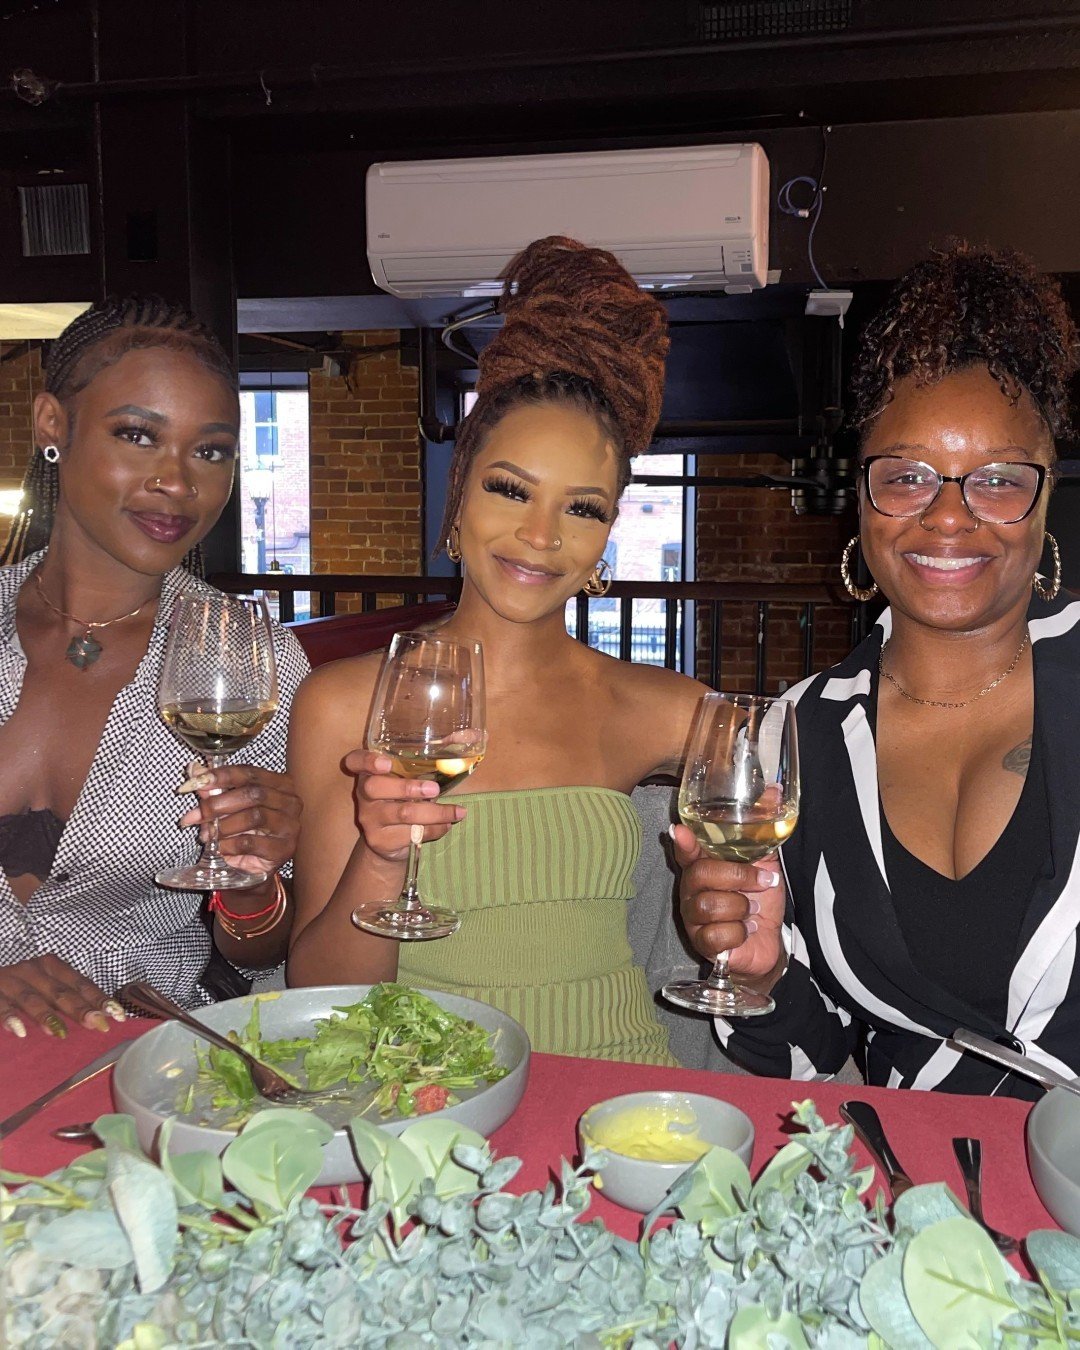 Our first Supper Club was something special ✨🍷 

Dewey's partnered with @jazzmunluisa (catch her behind the bar every Friday night) and @glendaleridgevineyard to curate an intimate dining experience. 

The event consisted of a four course meal, each